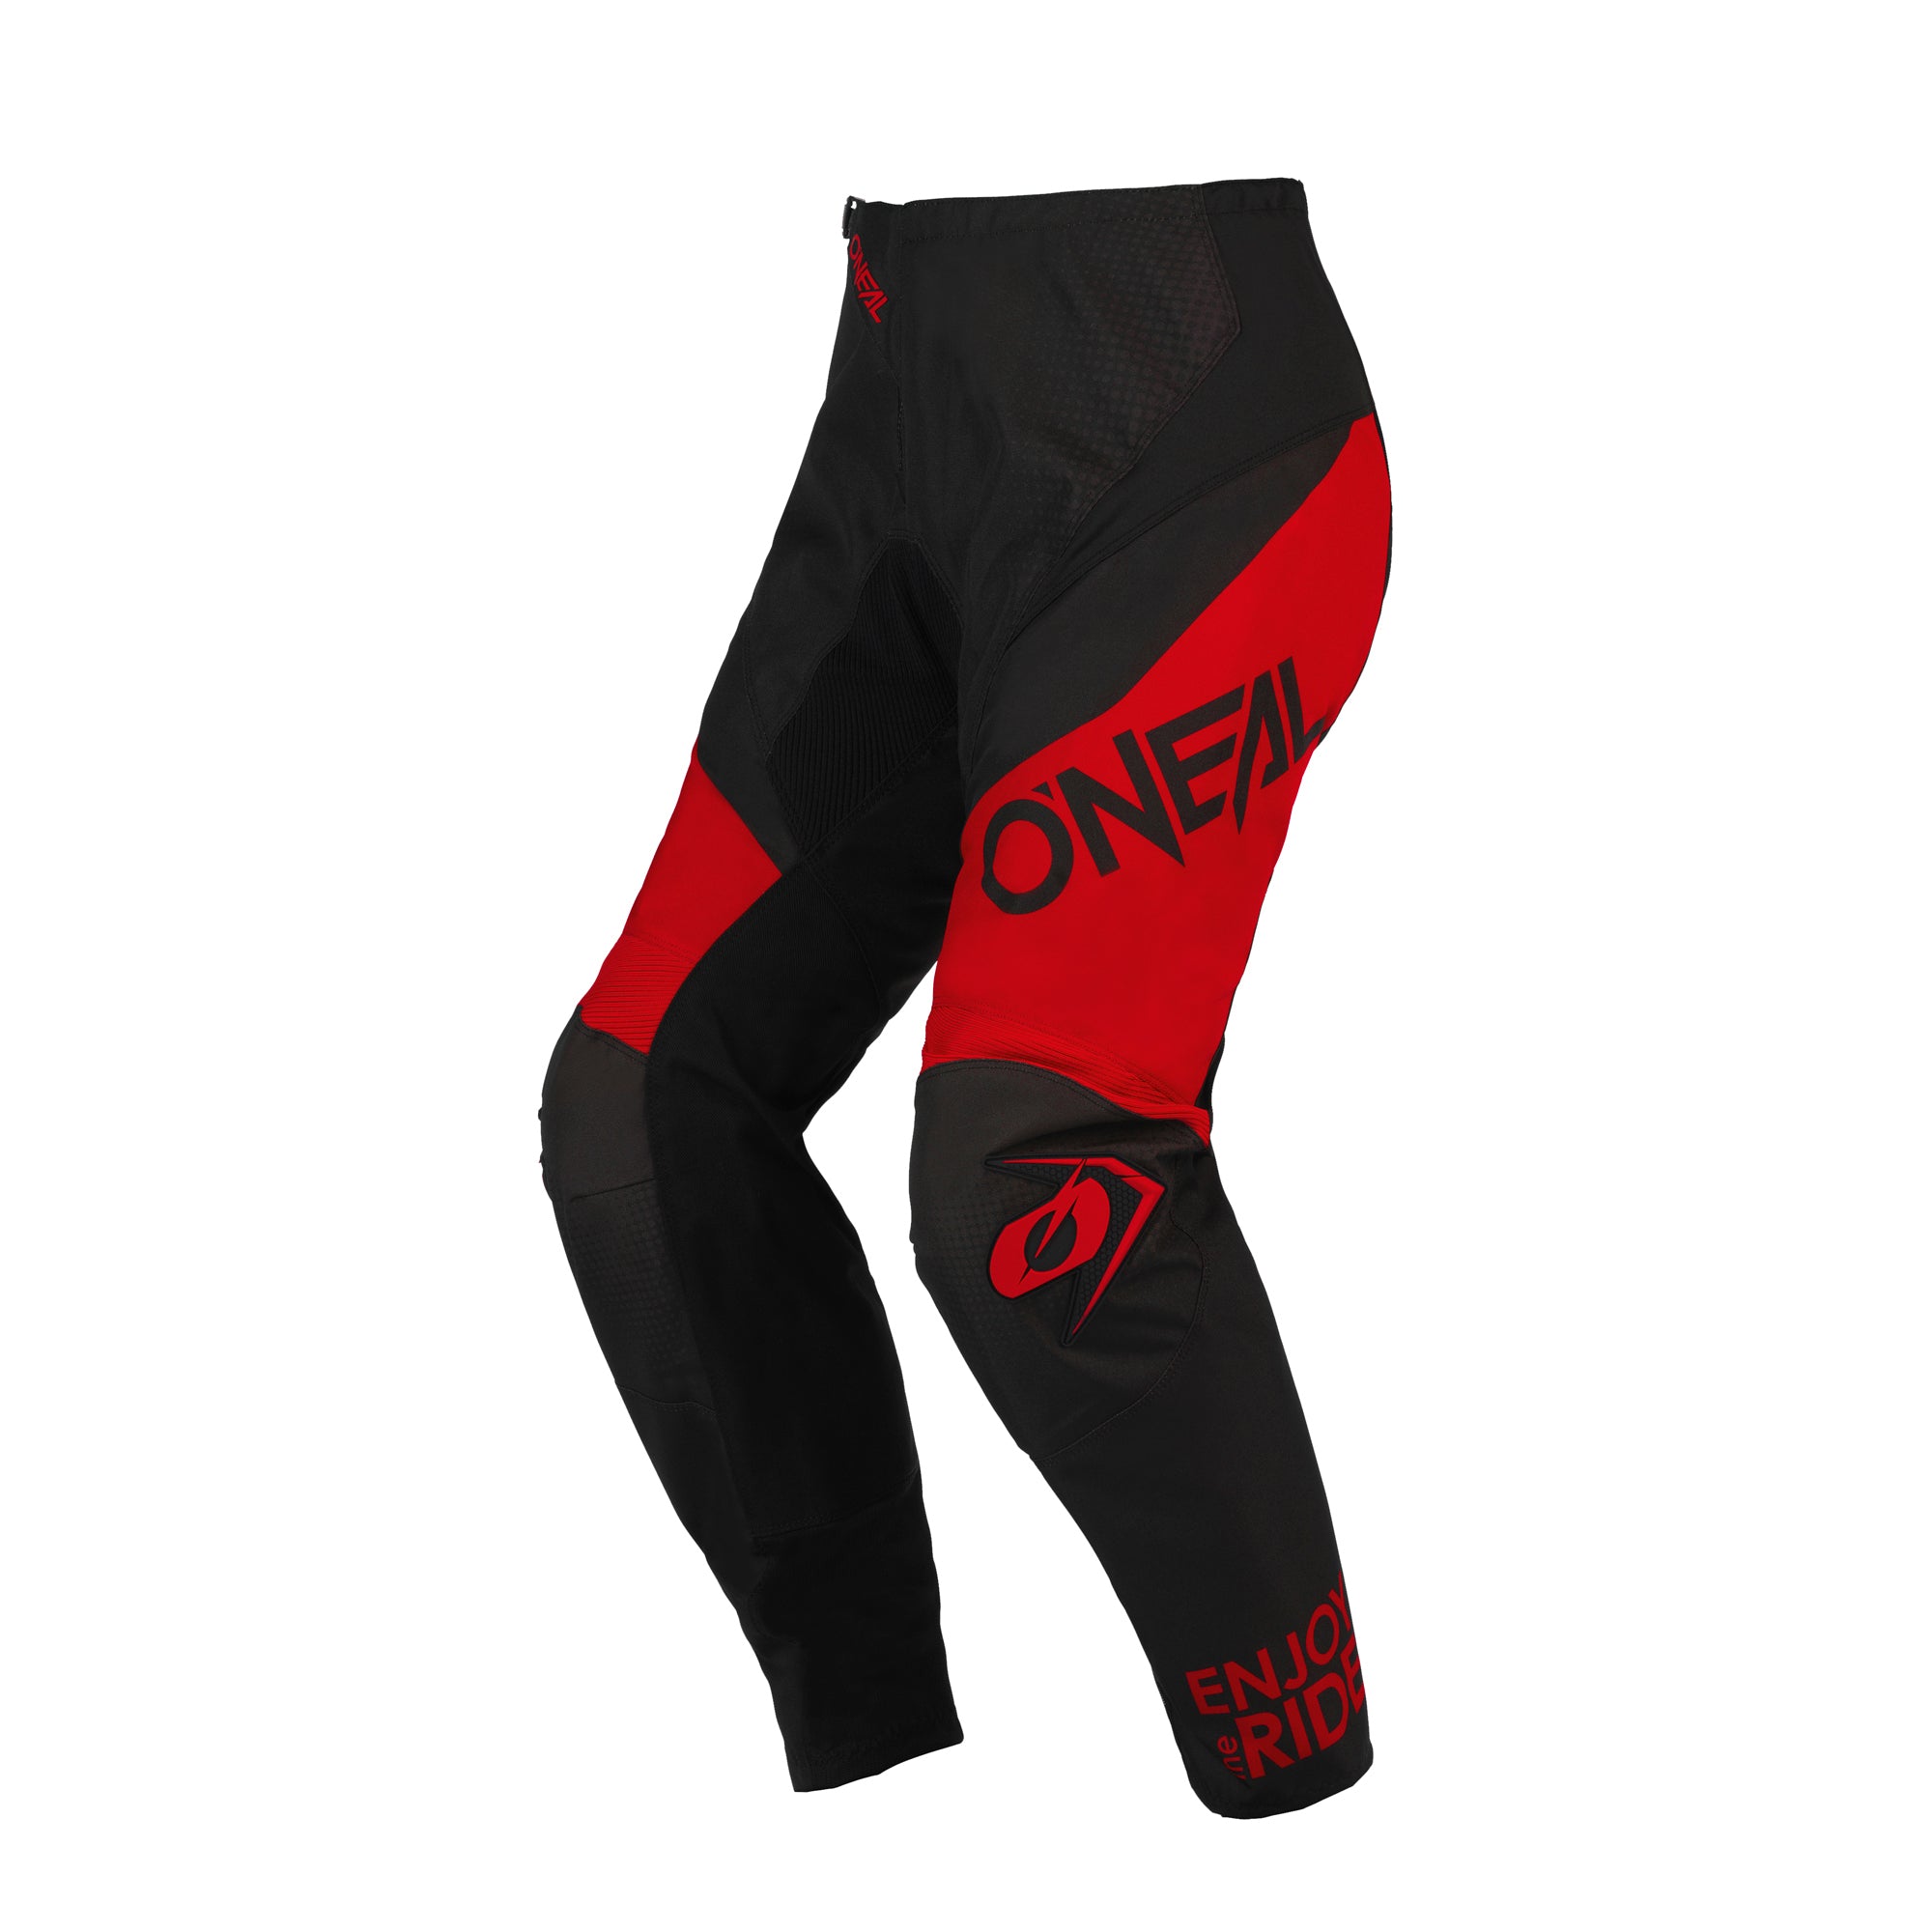 ELEMENT GEAR PAGE – ONEAL USA